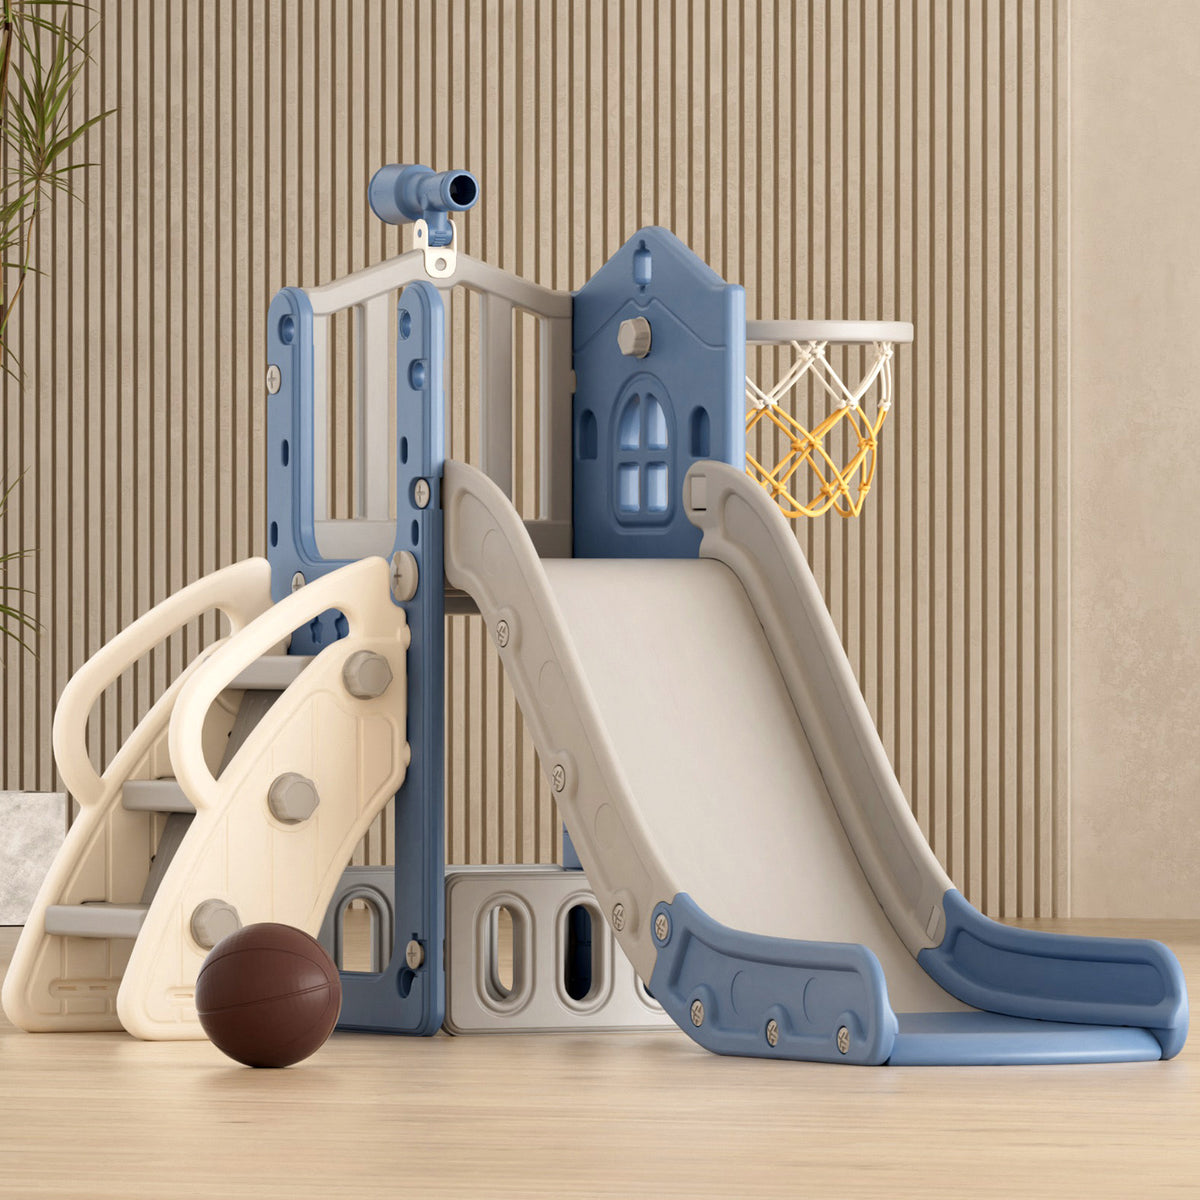 XJD 5 in 1 Toddler Slide Set  Climber Slide for Age 1-3, Outdoor Indoor Playset, Slide with Basketball Hoop, Telescope, and Storage Space, Blue/Grey